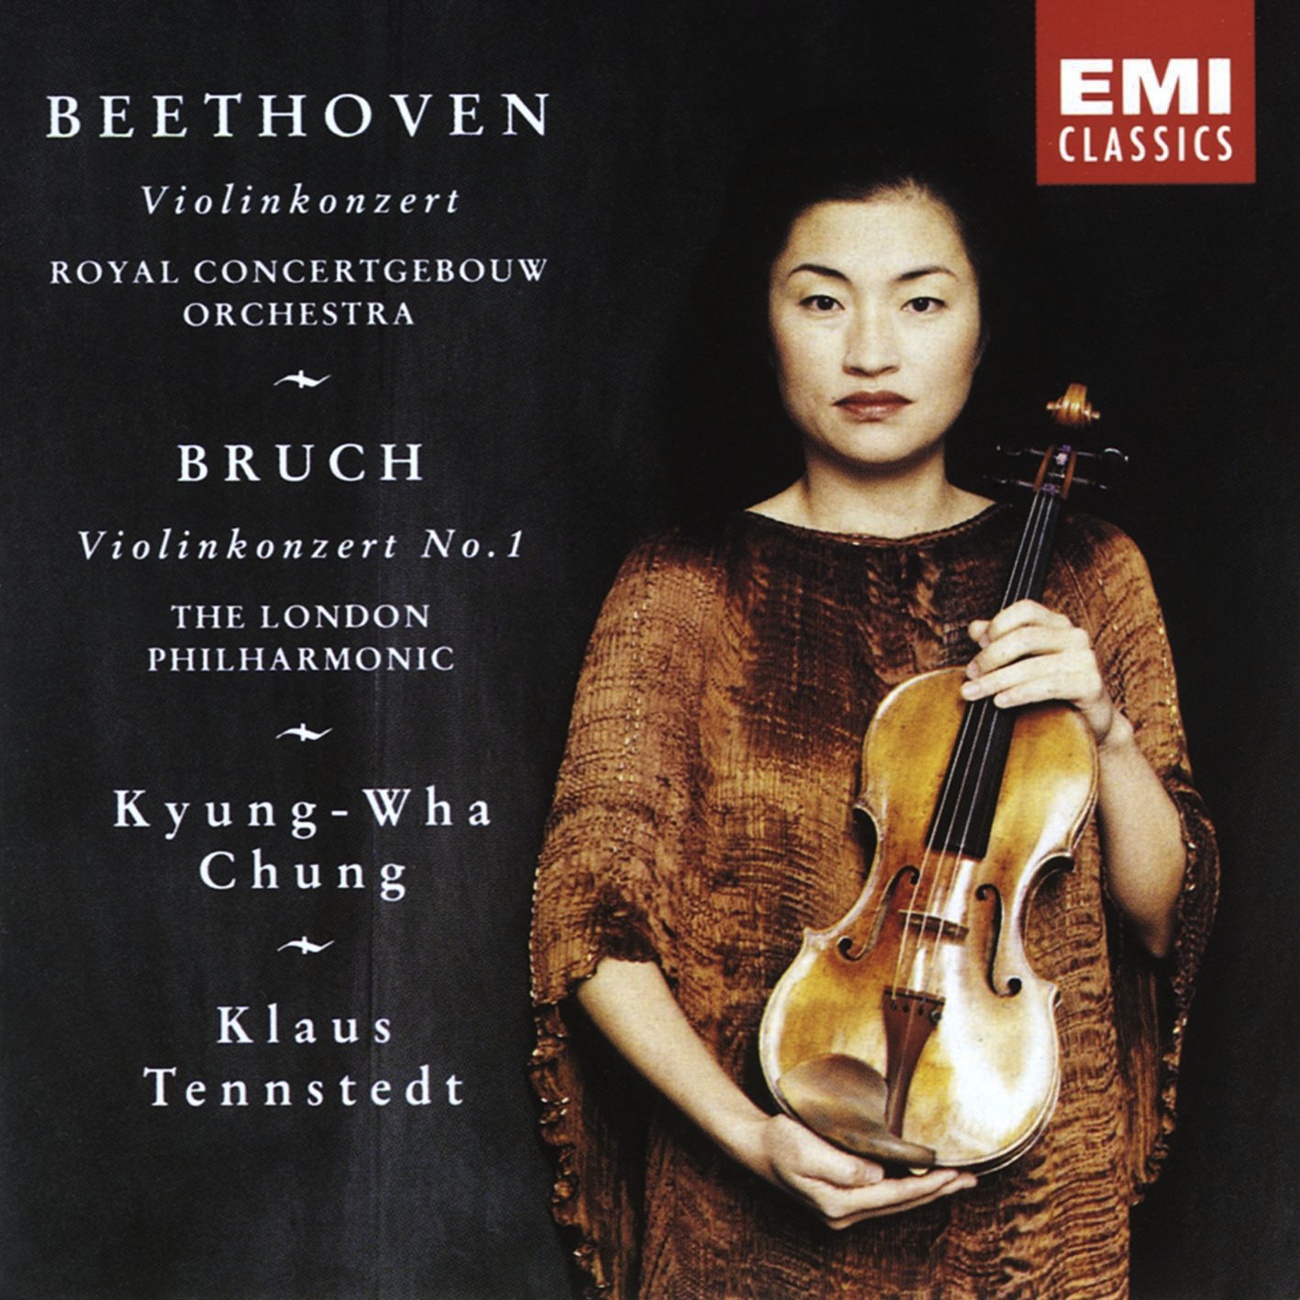 Concerto for Violin and Orchestra in D Op. 61: III. Rondo (Allegro)